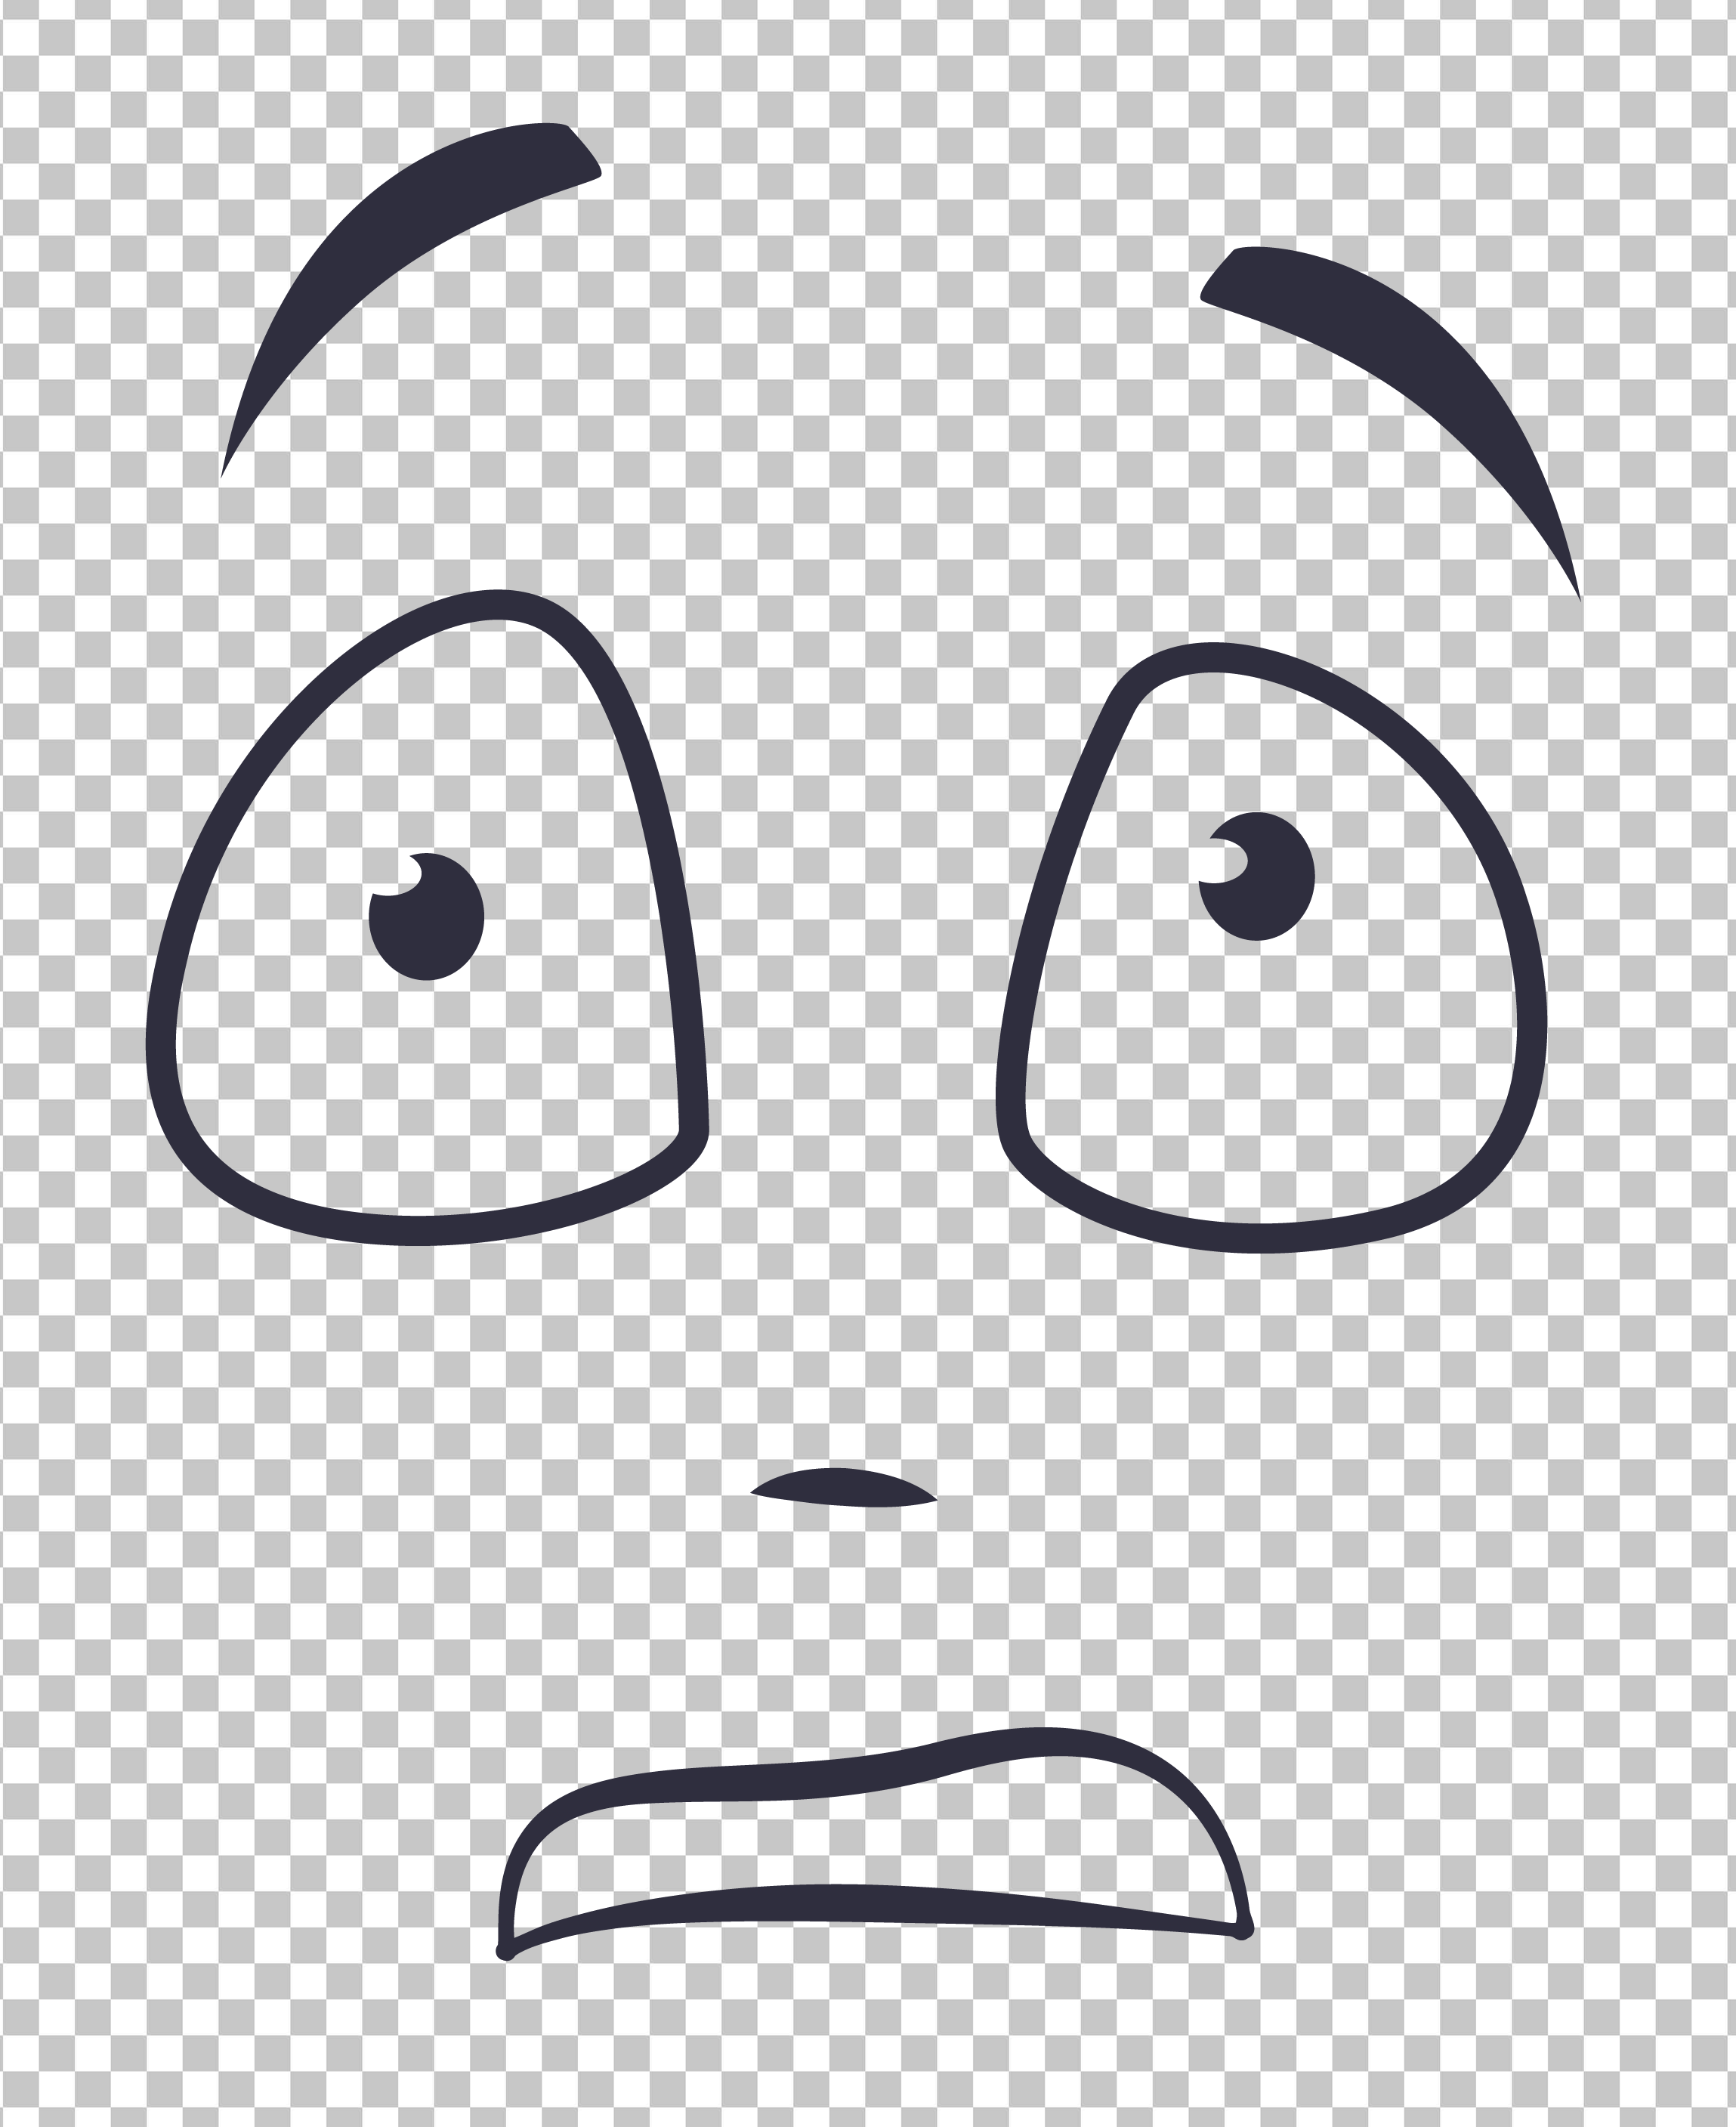 Surprised Expression with Cartoon Face PNG Image